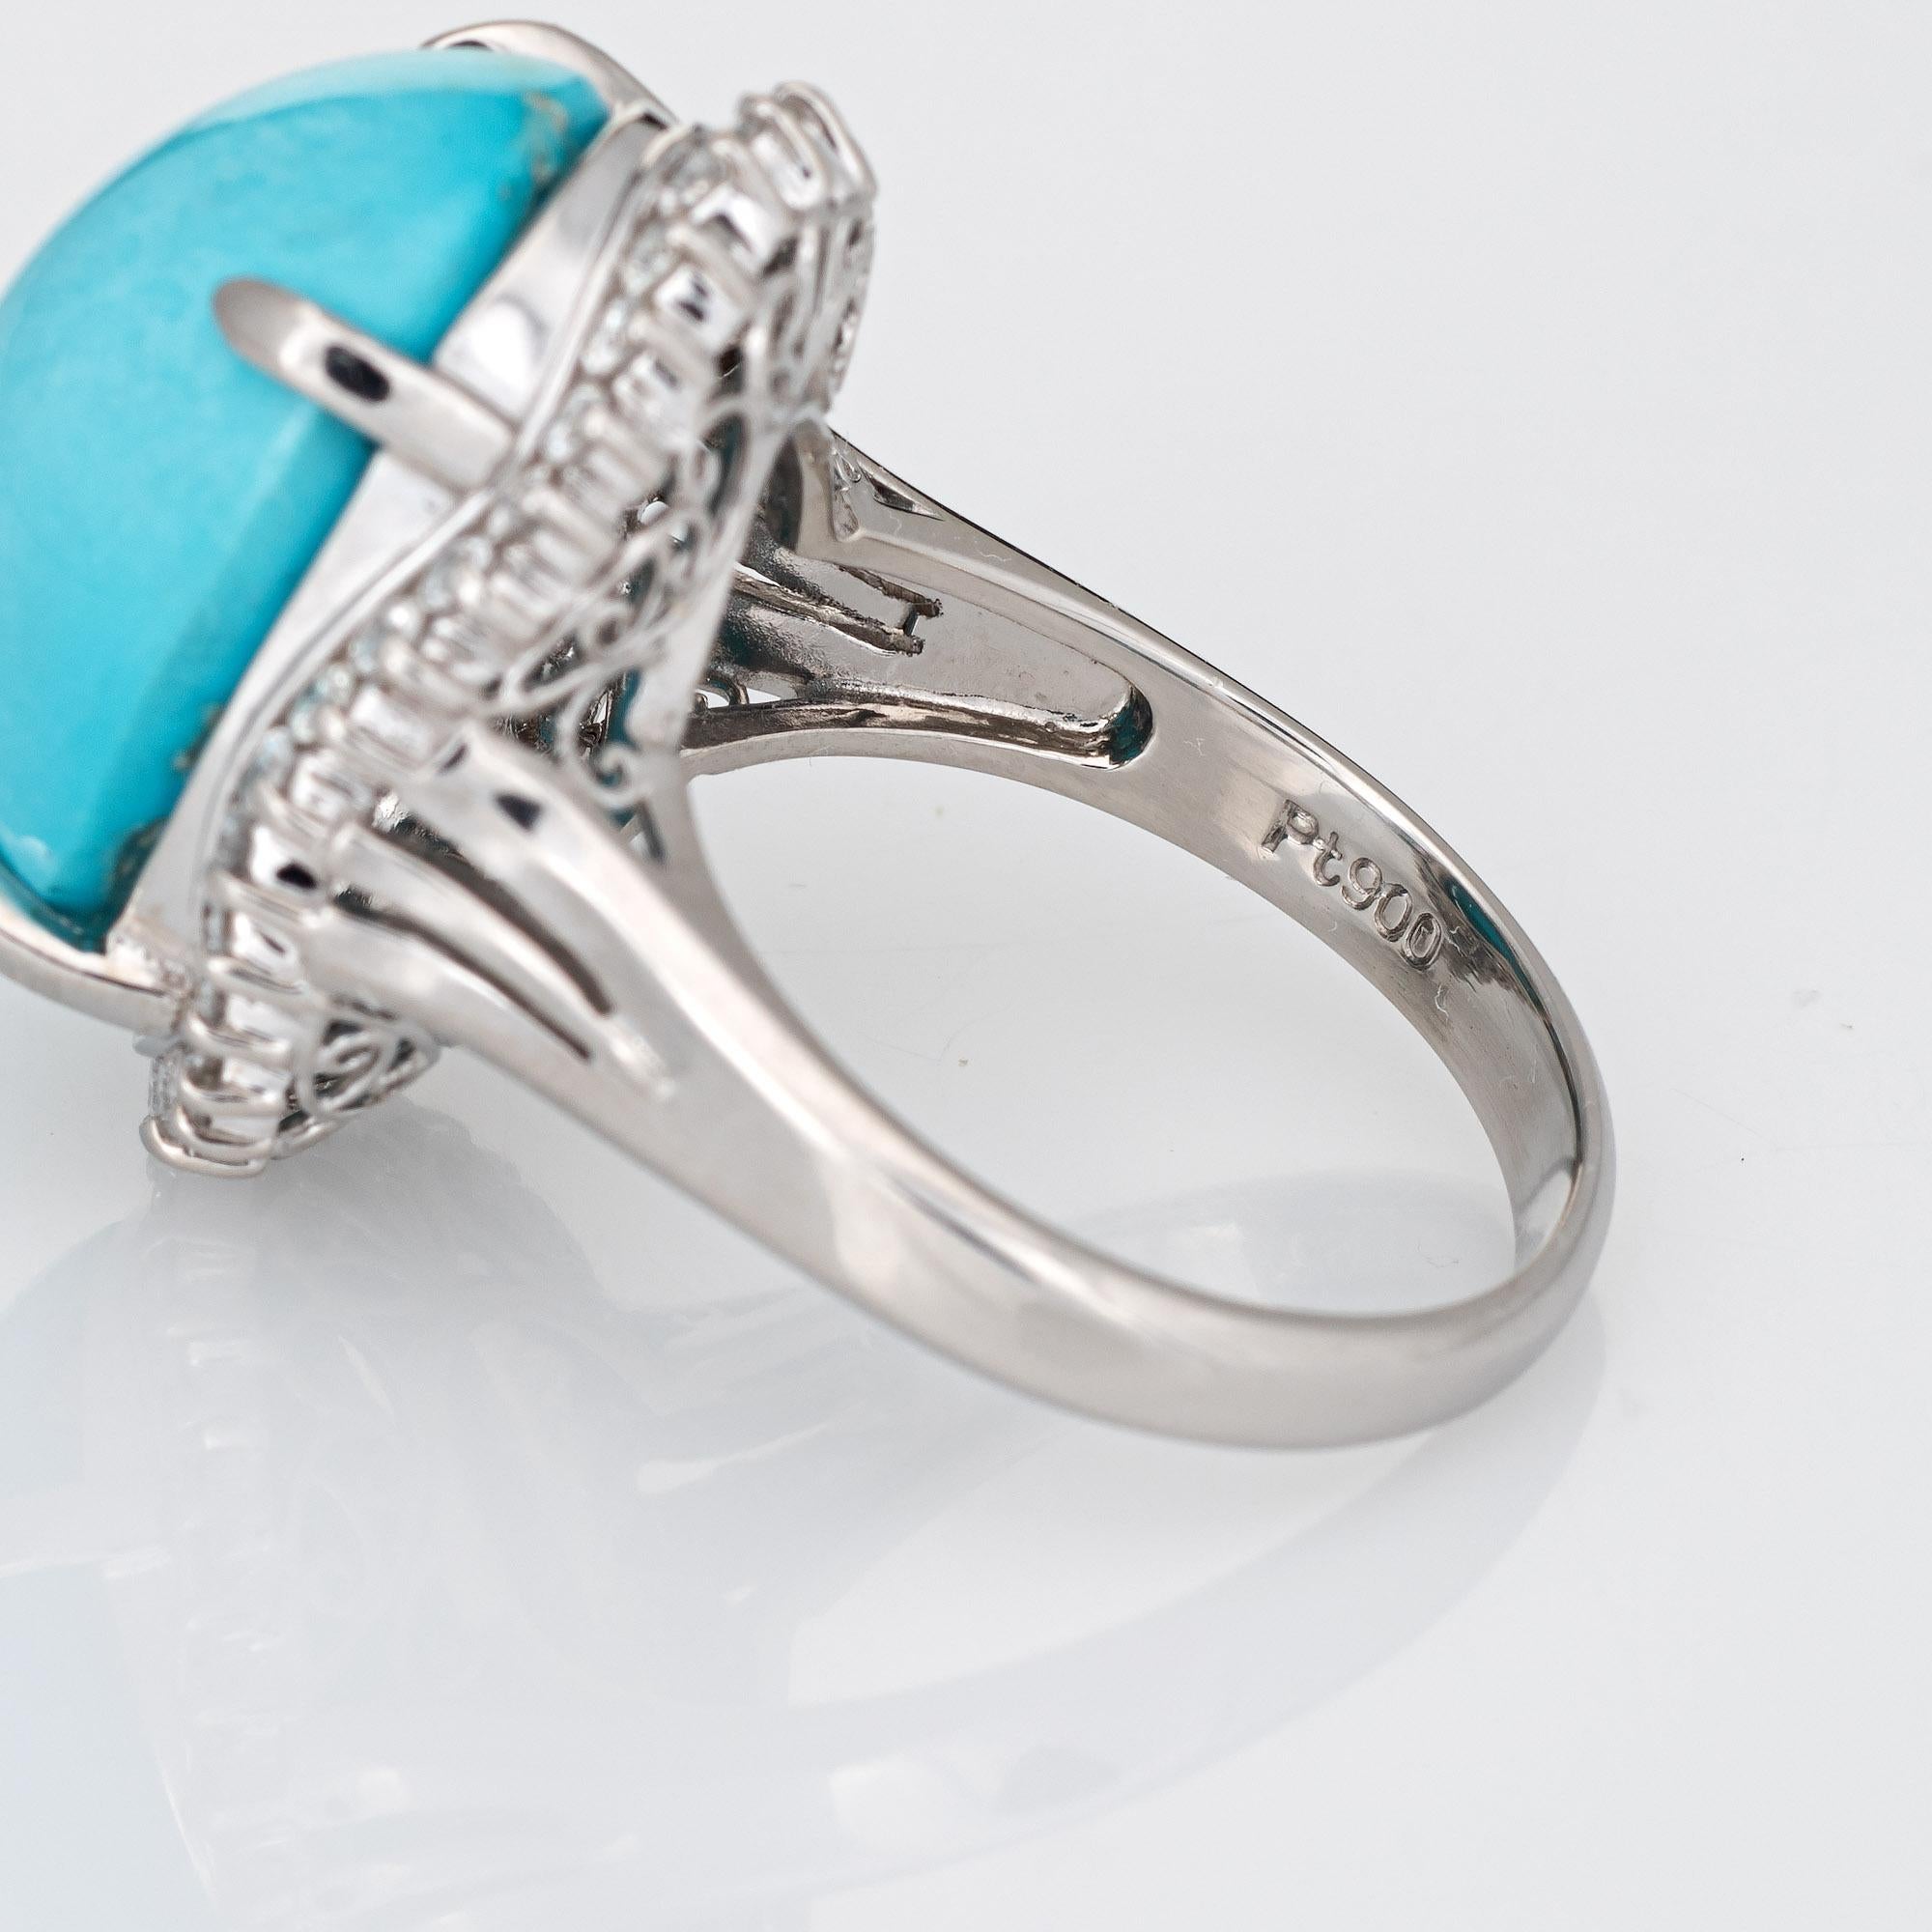 Cabochon Egg Shell Blue Turquoise Diamond Ring Platinum Estate Large Cocktail Jewelry For Sale